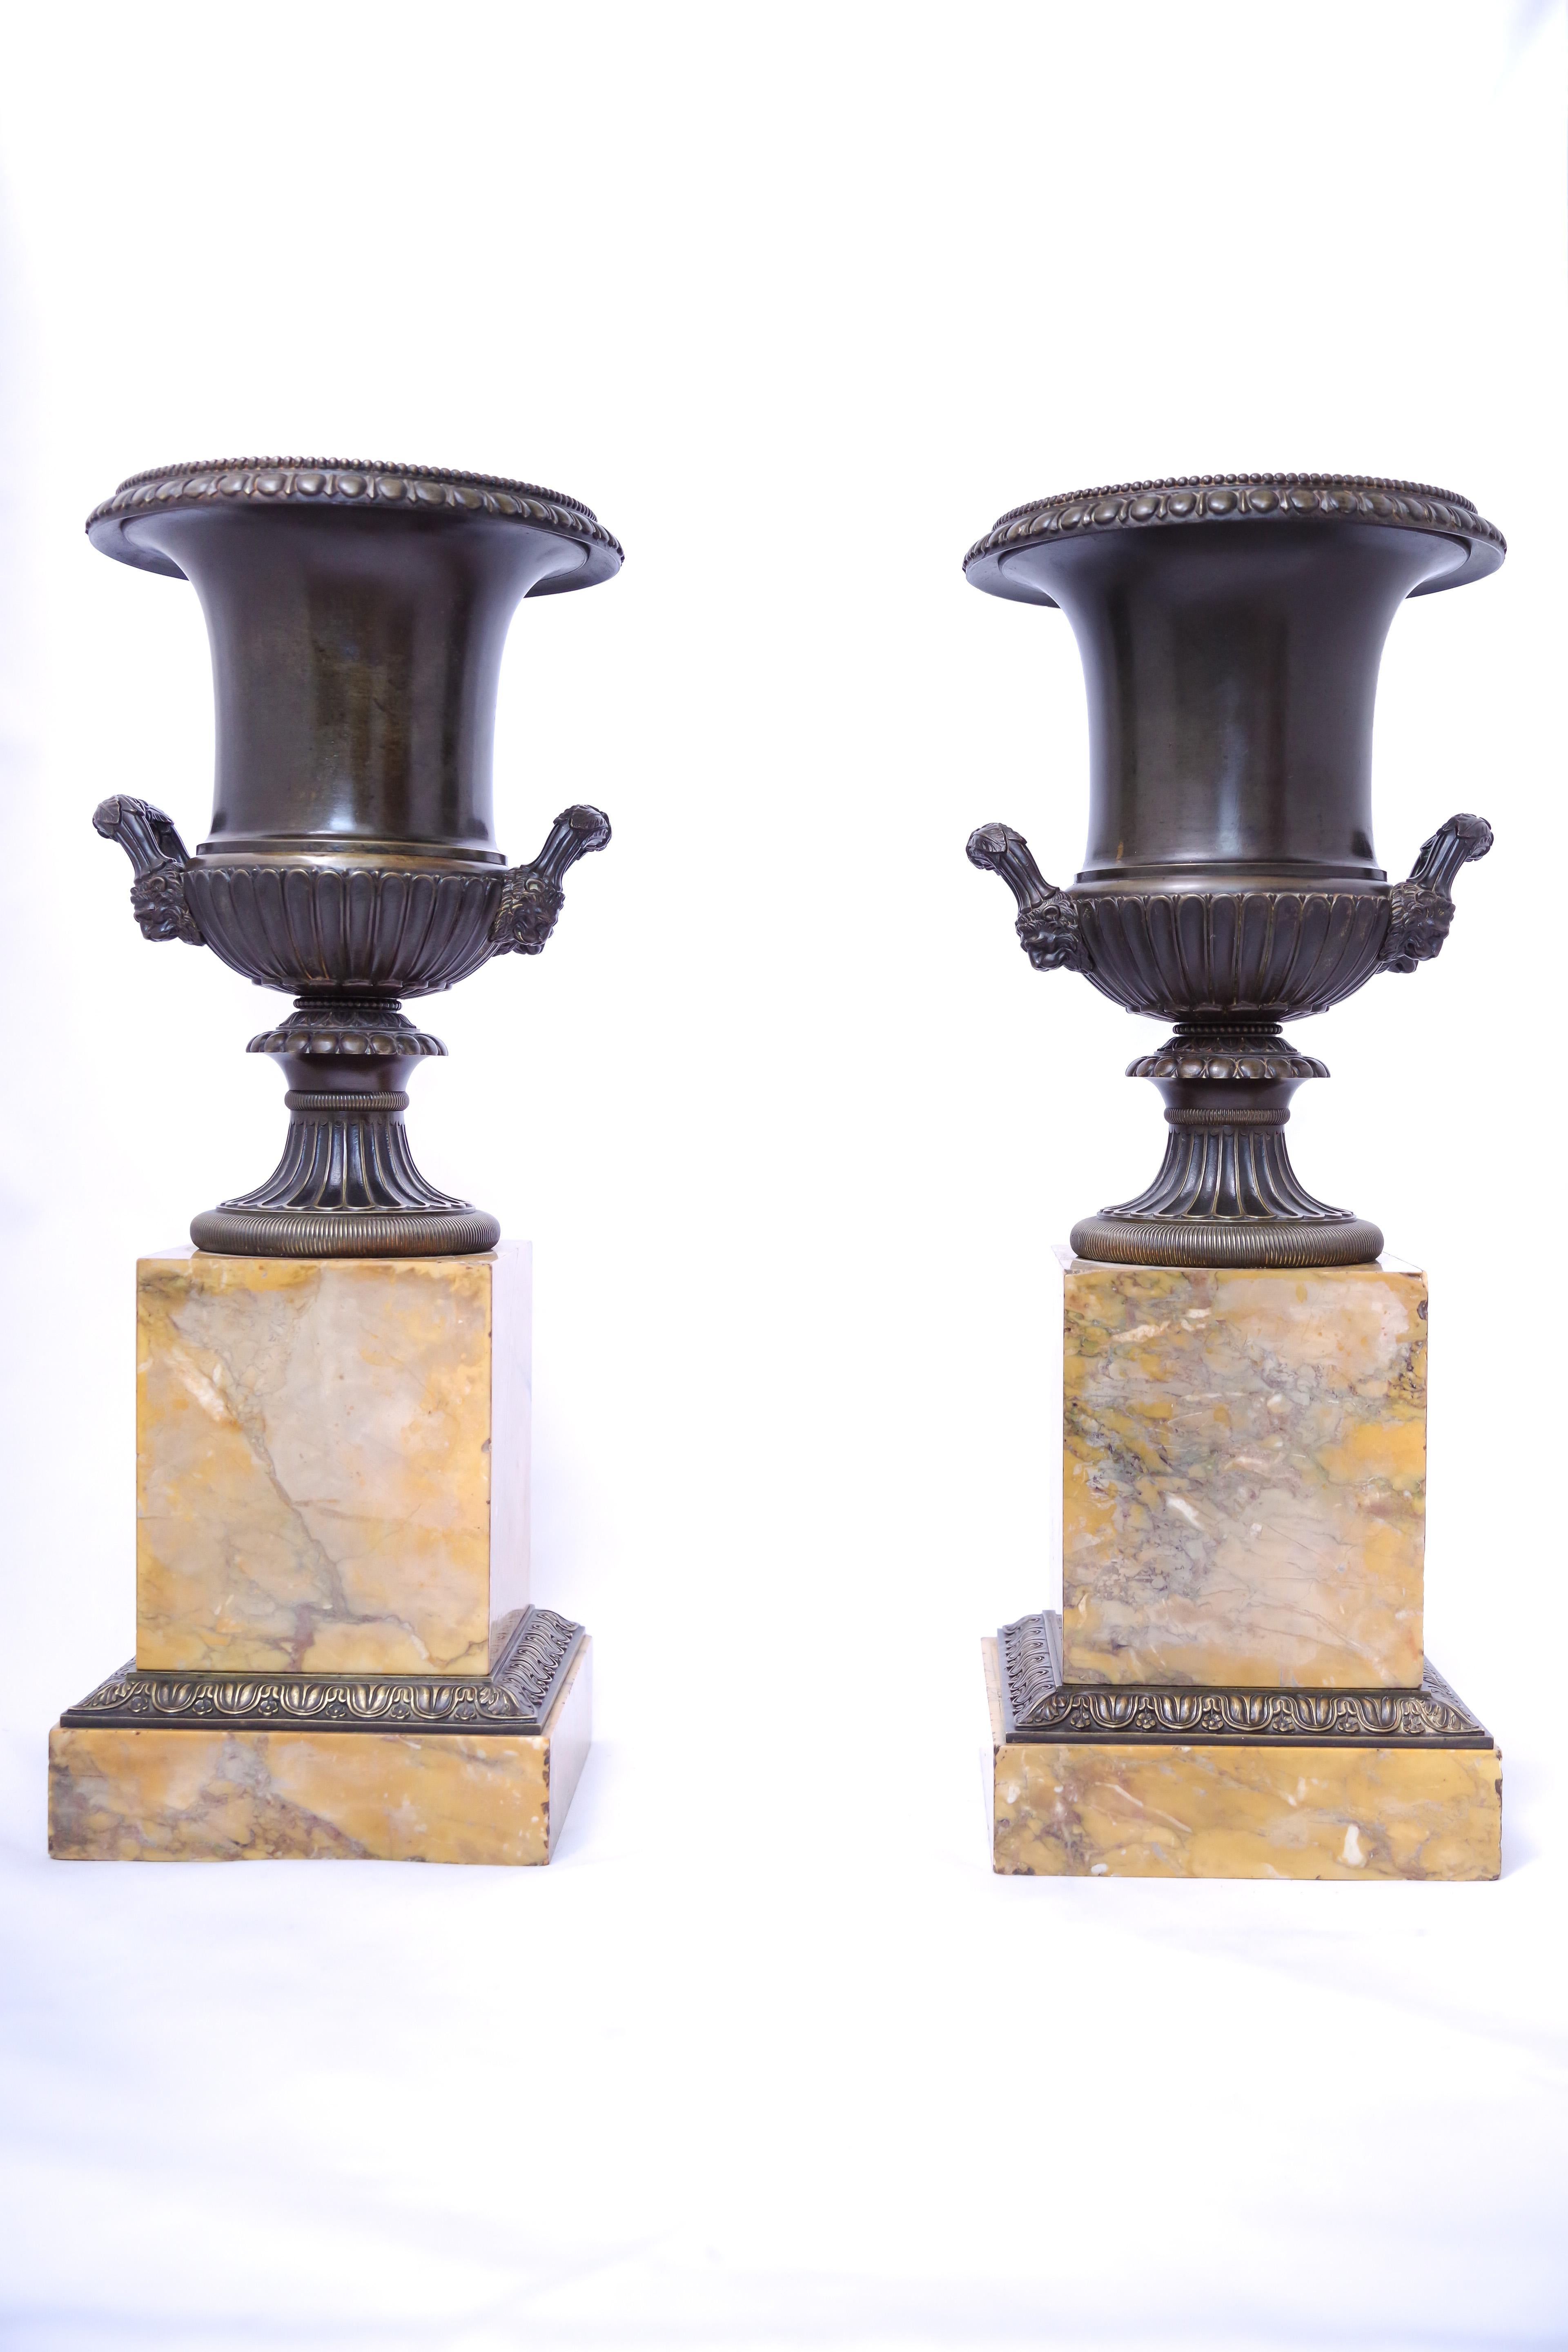 A pair of bronze Medici vases from the Charles X period, circa 1830. The bases are in the yellow Siena marble so popular in early-to-mid-century France. The blackish-green-patinated vases are adorned with finely-chiseled classical motifs.